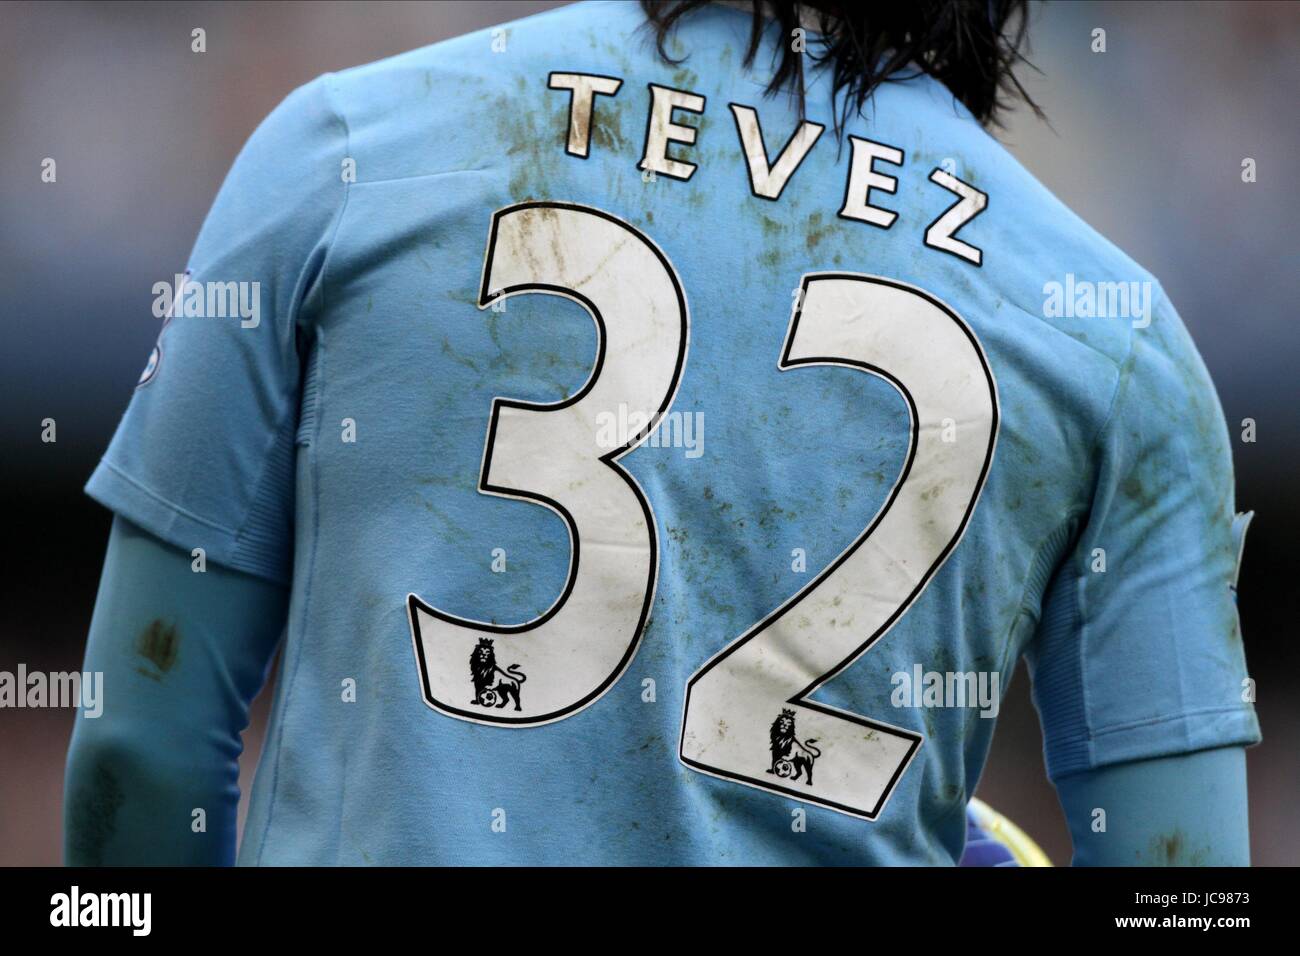 CARLOS TEVEZ SQUAD NUMBER MANCHESTER 